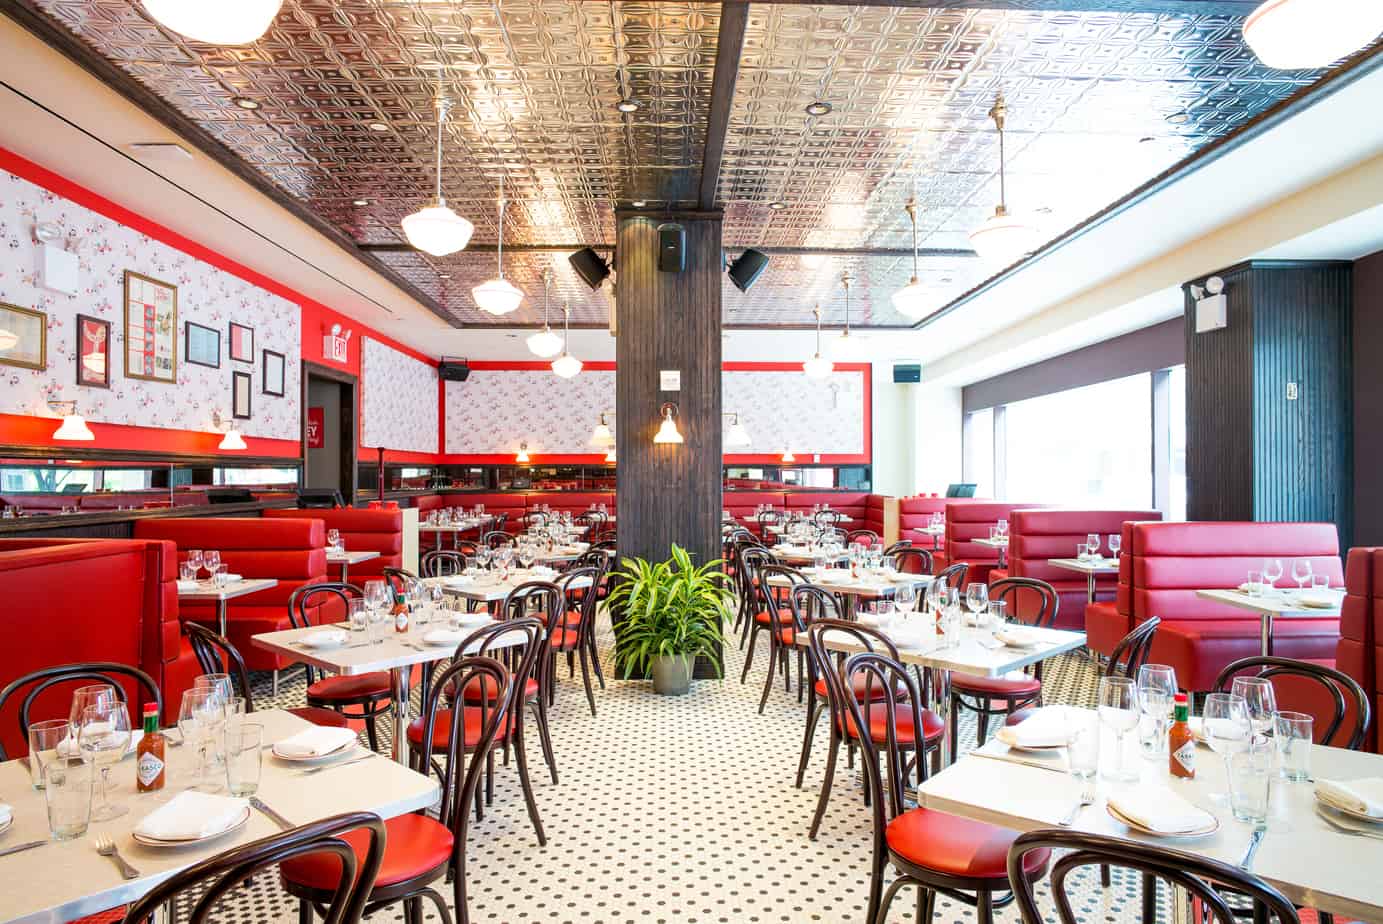 Parm restaurant interior with red leather booth seating and several four-top tables